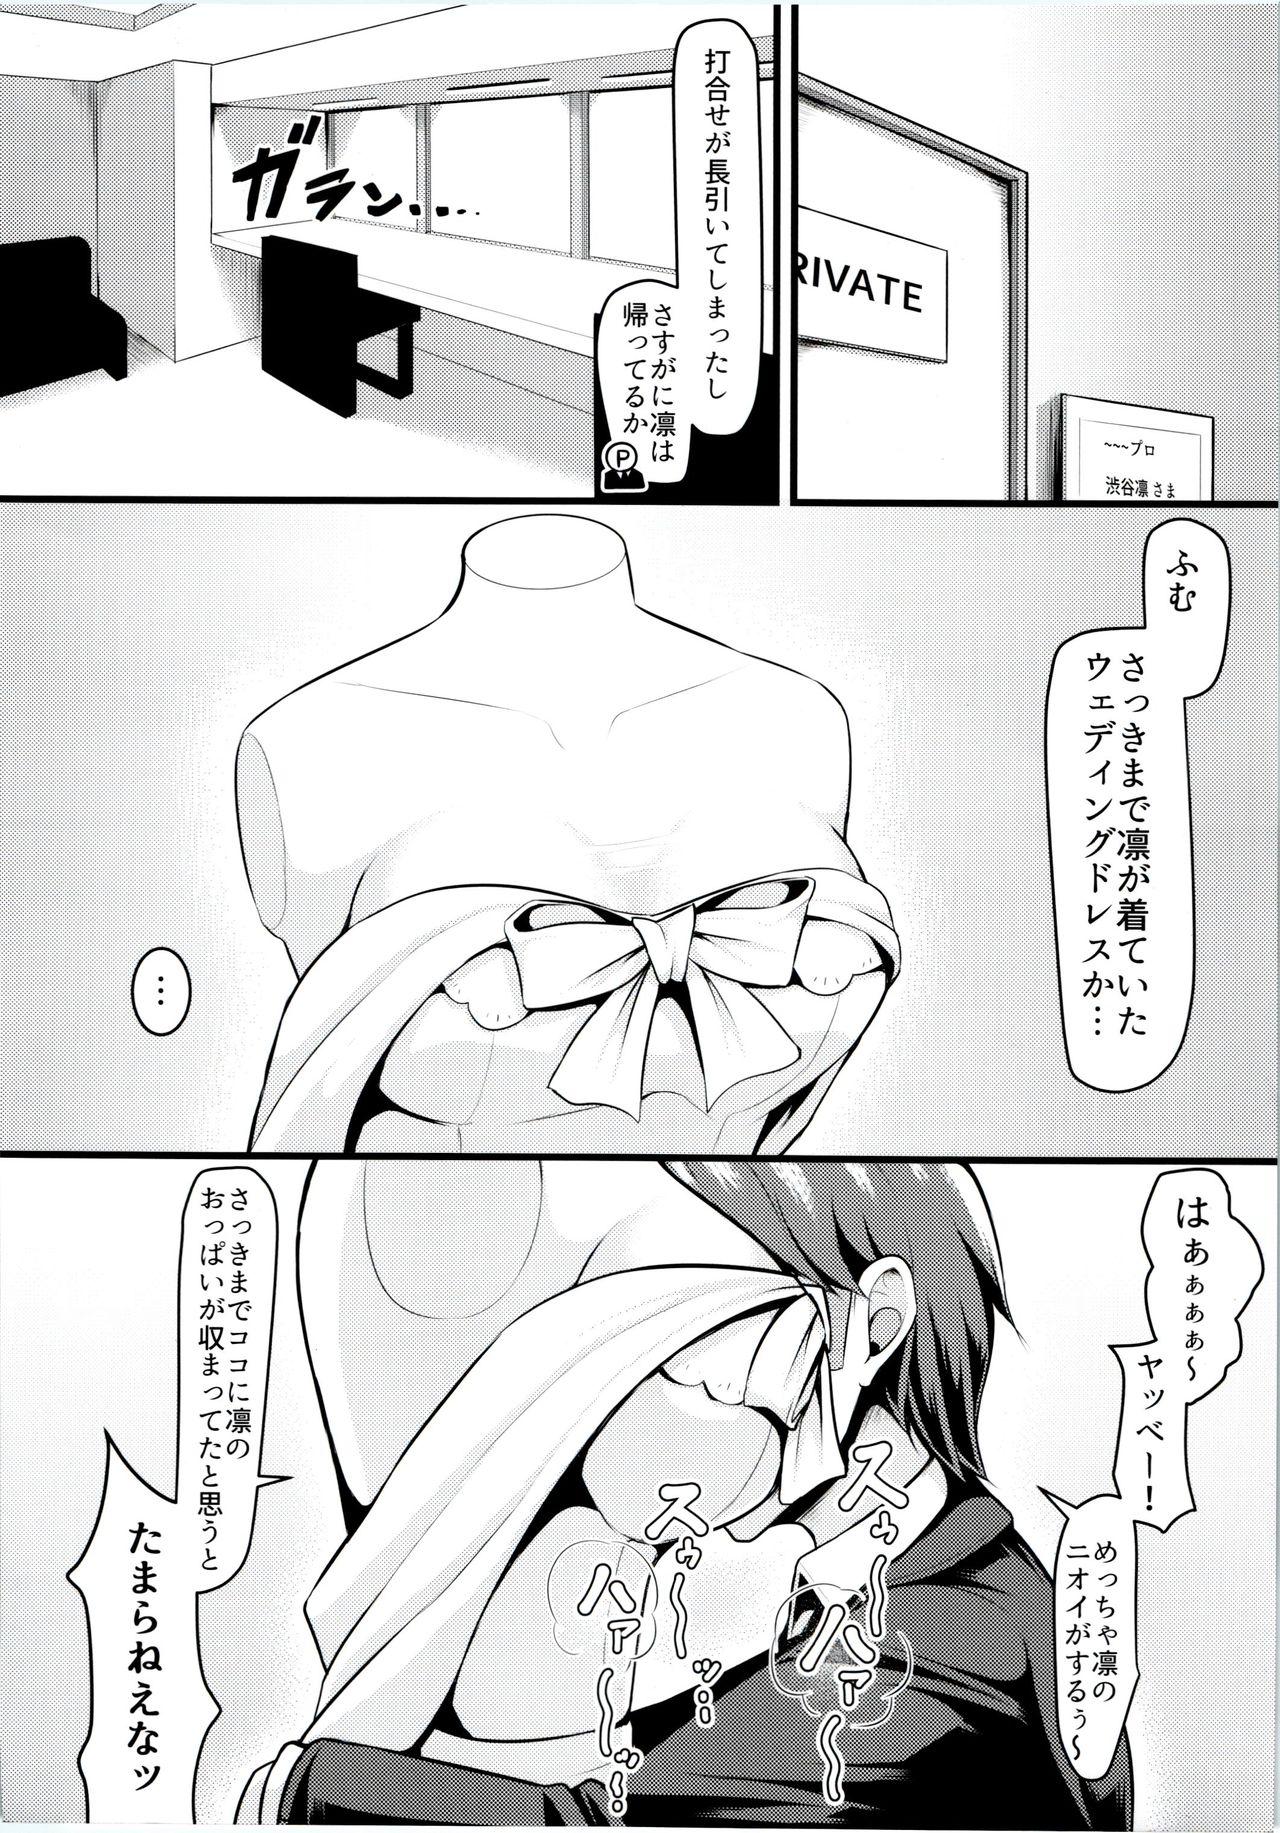 Woman (Utahime Teien 13) [Lamchat! (Lamcha)] Wed-rin-g! (THE IDOLM@STER CINDERELLA GIRLS) - The idolmaster Cam Sex - Page 5